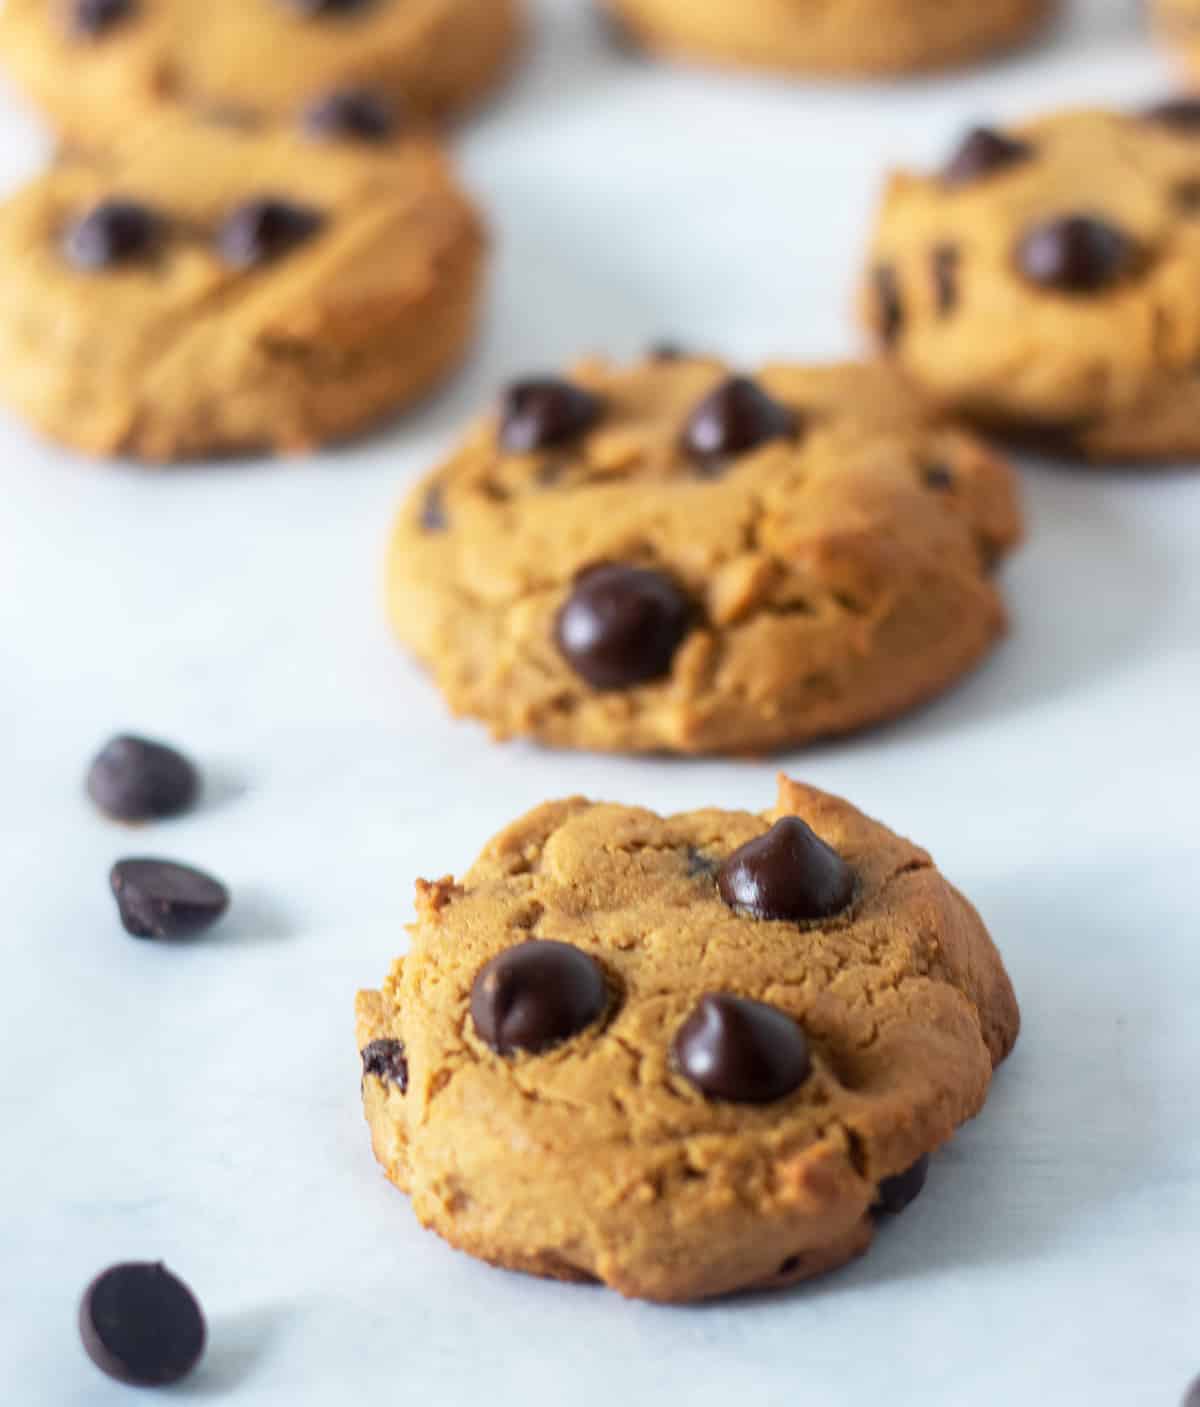 coconut flour chocolate chip cookies after being cooked on a parchment lined baking pan with chocolate chips beside them.